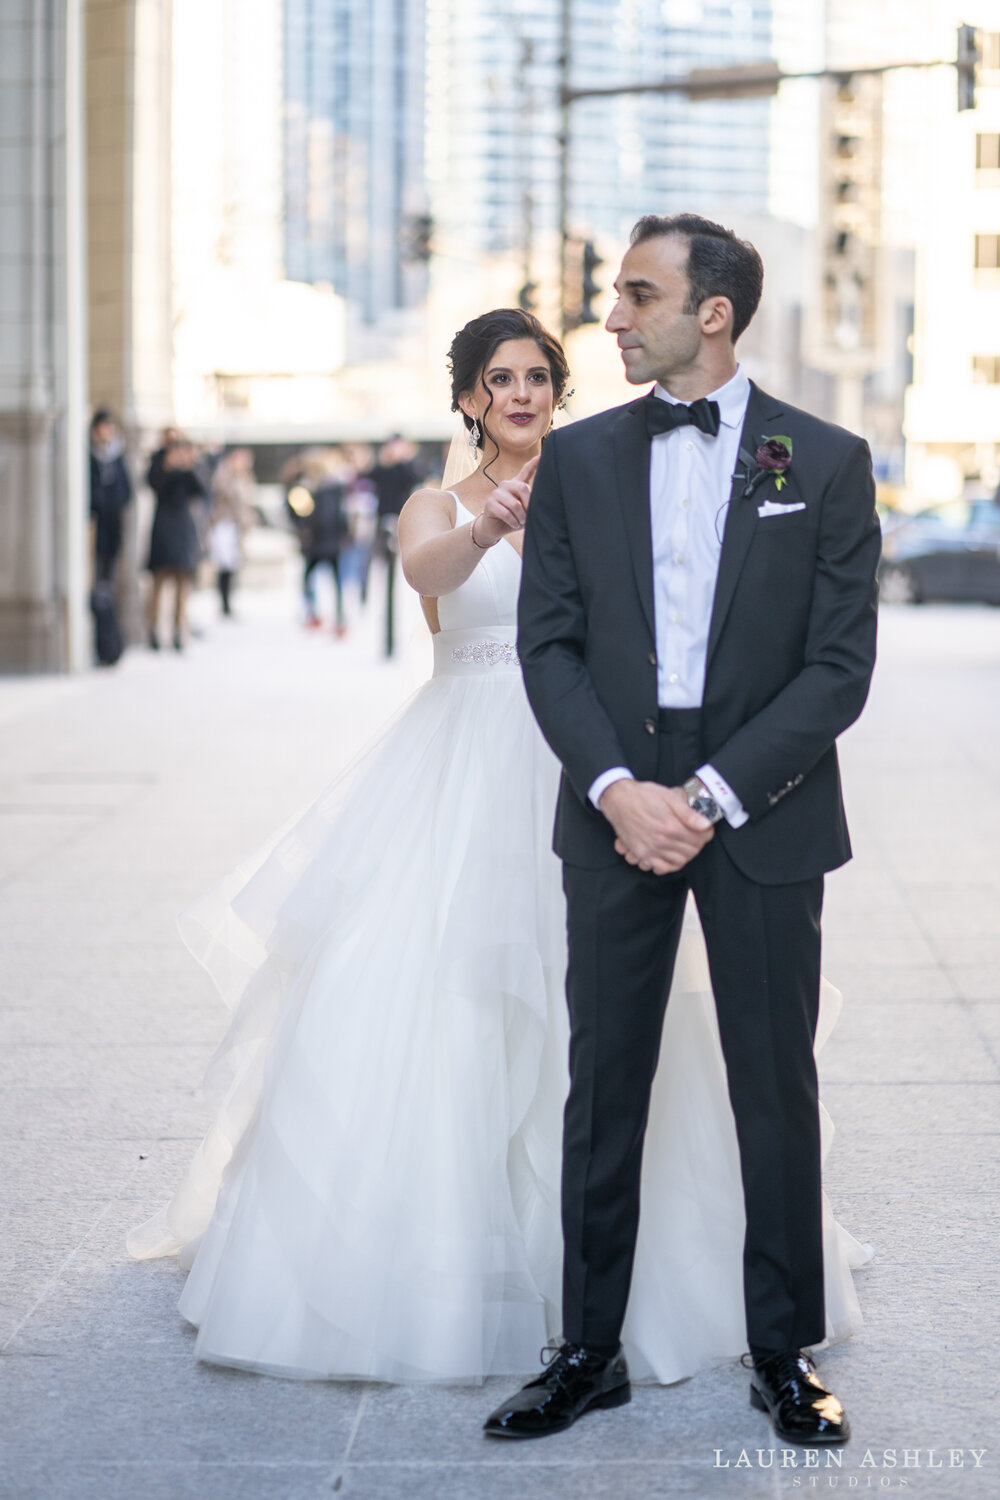 intercontinental-chicago-high-end-michigan-ave-magnificent-mile-wedding-chicago-wedding-photography-53.jpg